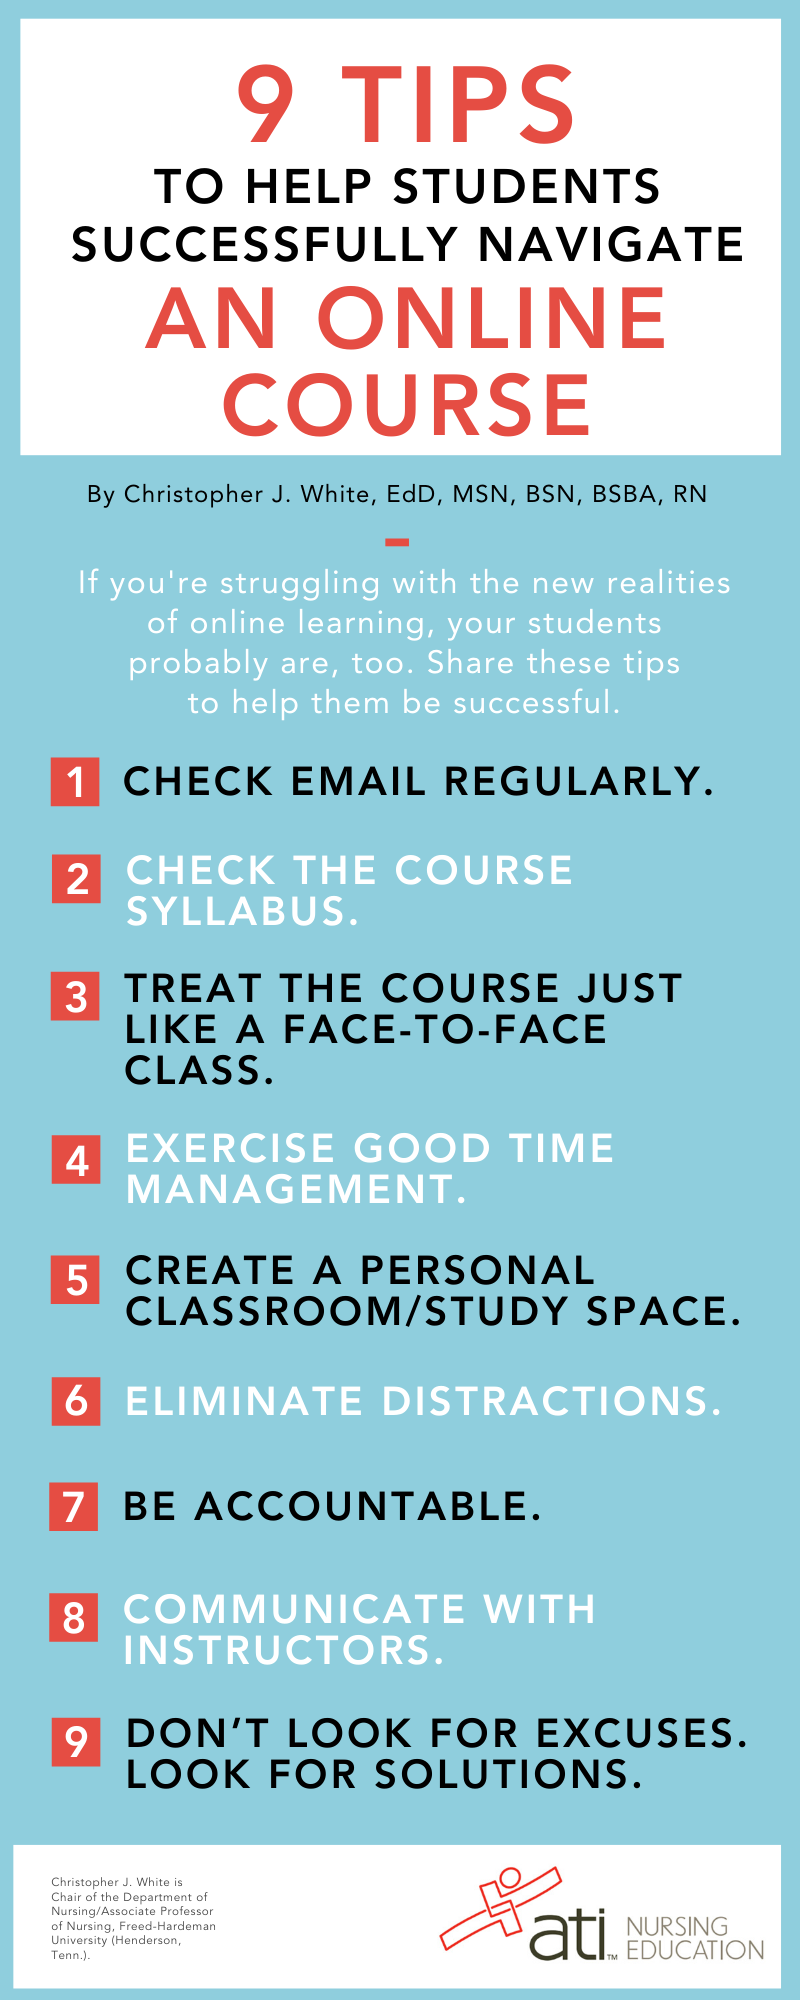 5 Tips to Succeed in an Online Course